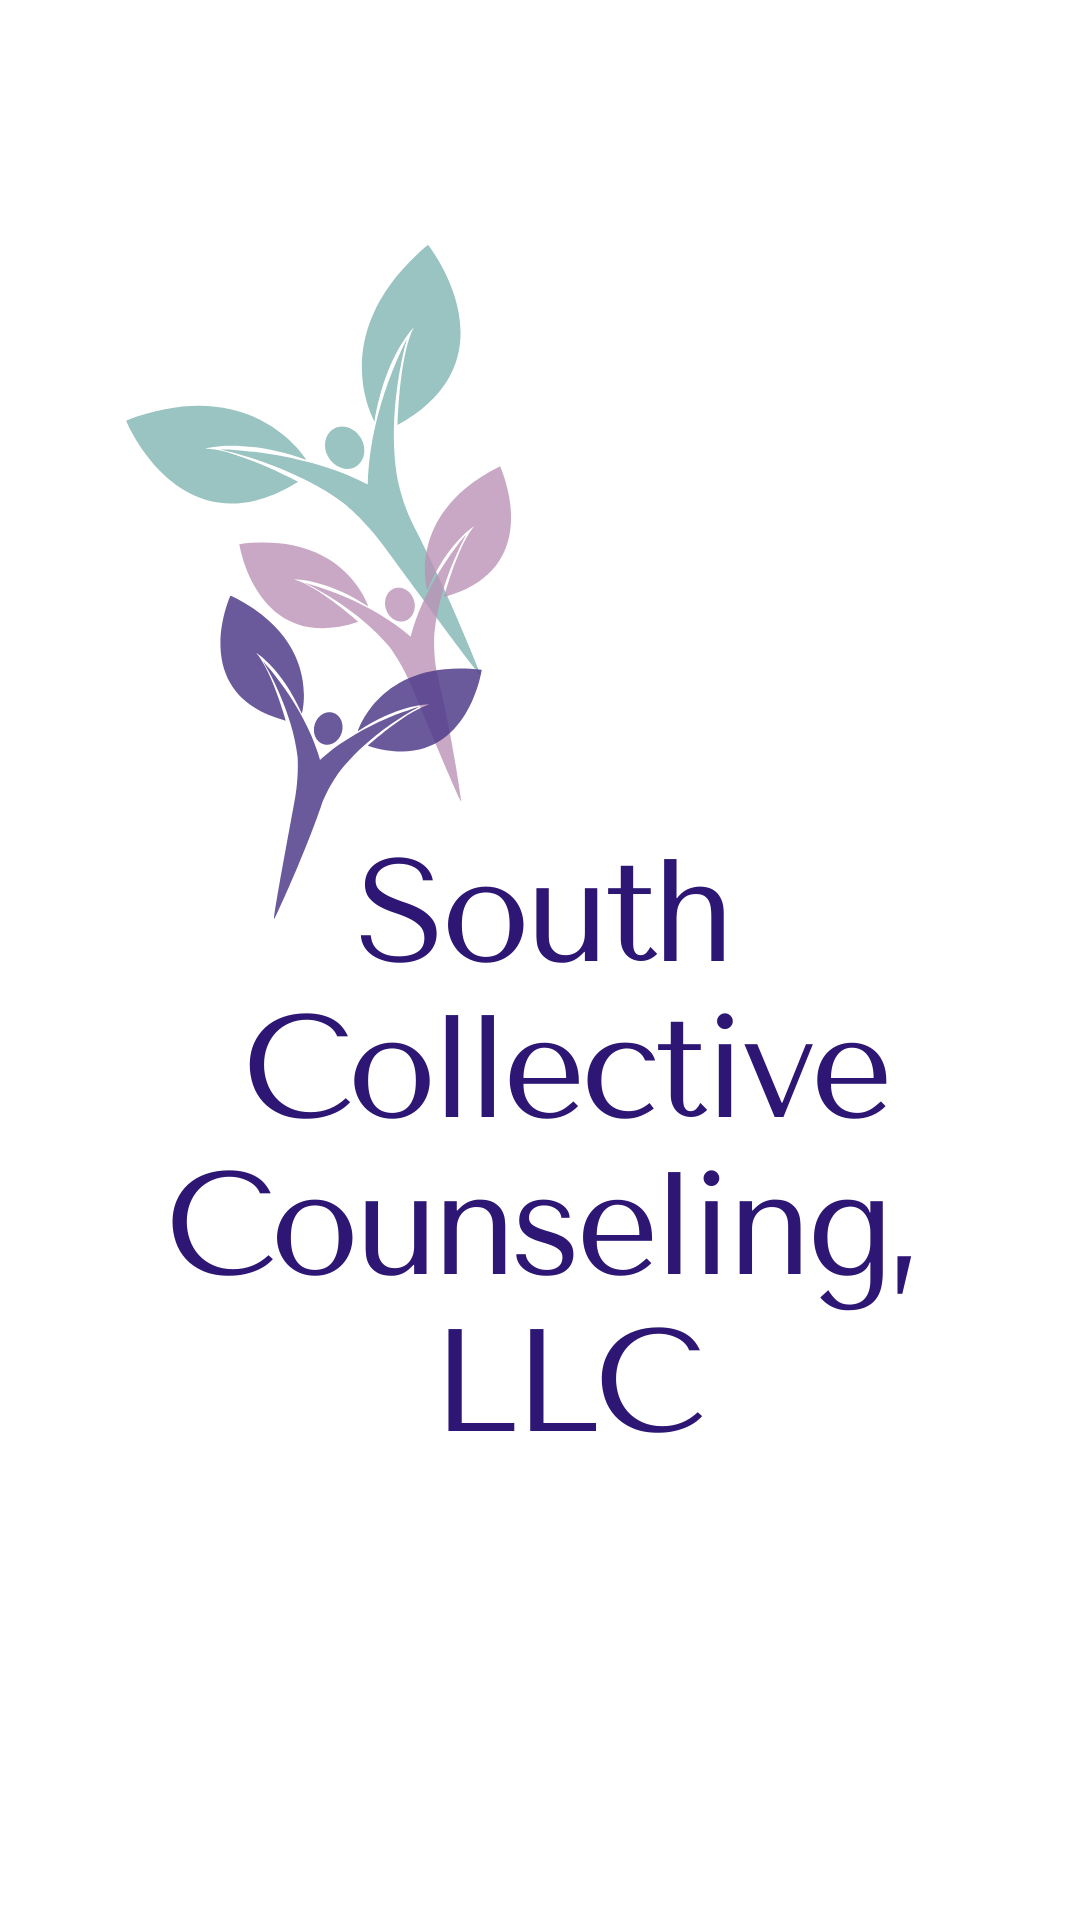 South Collective Counseling | Parsippany NJ